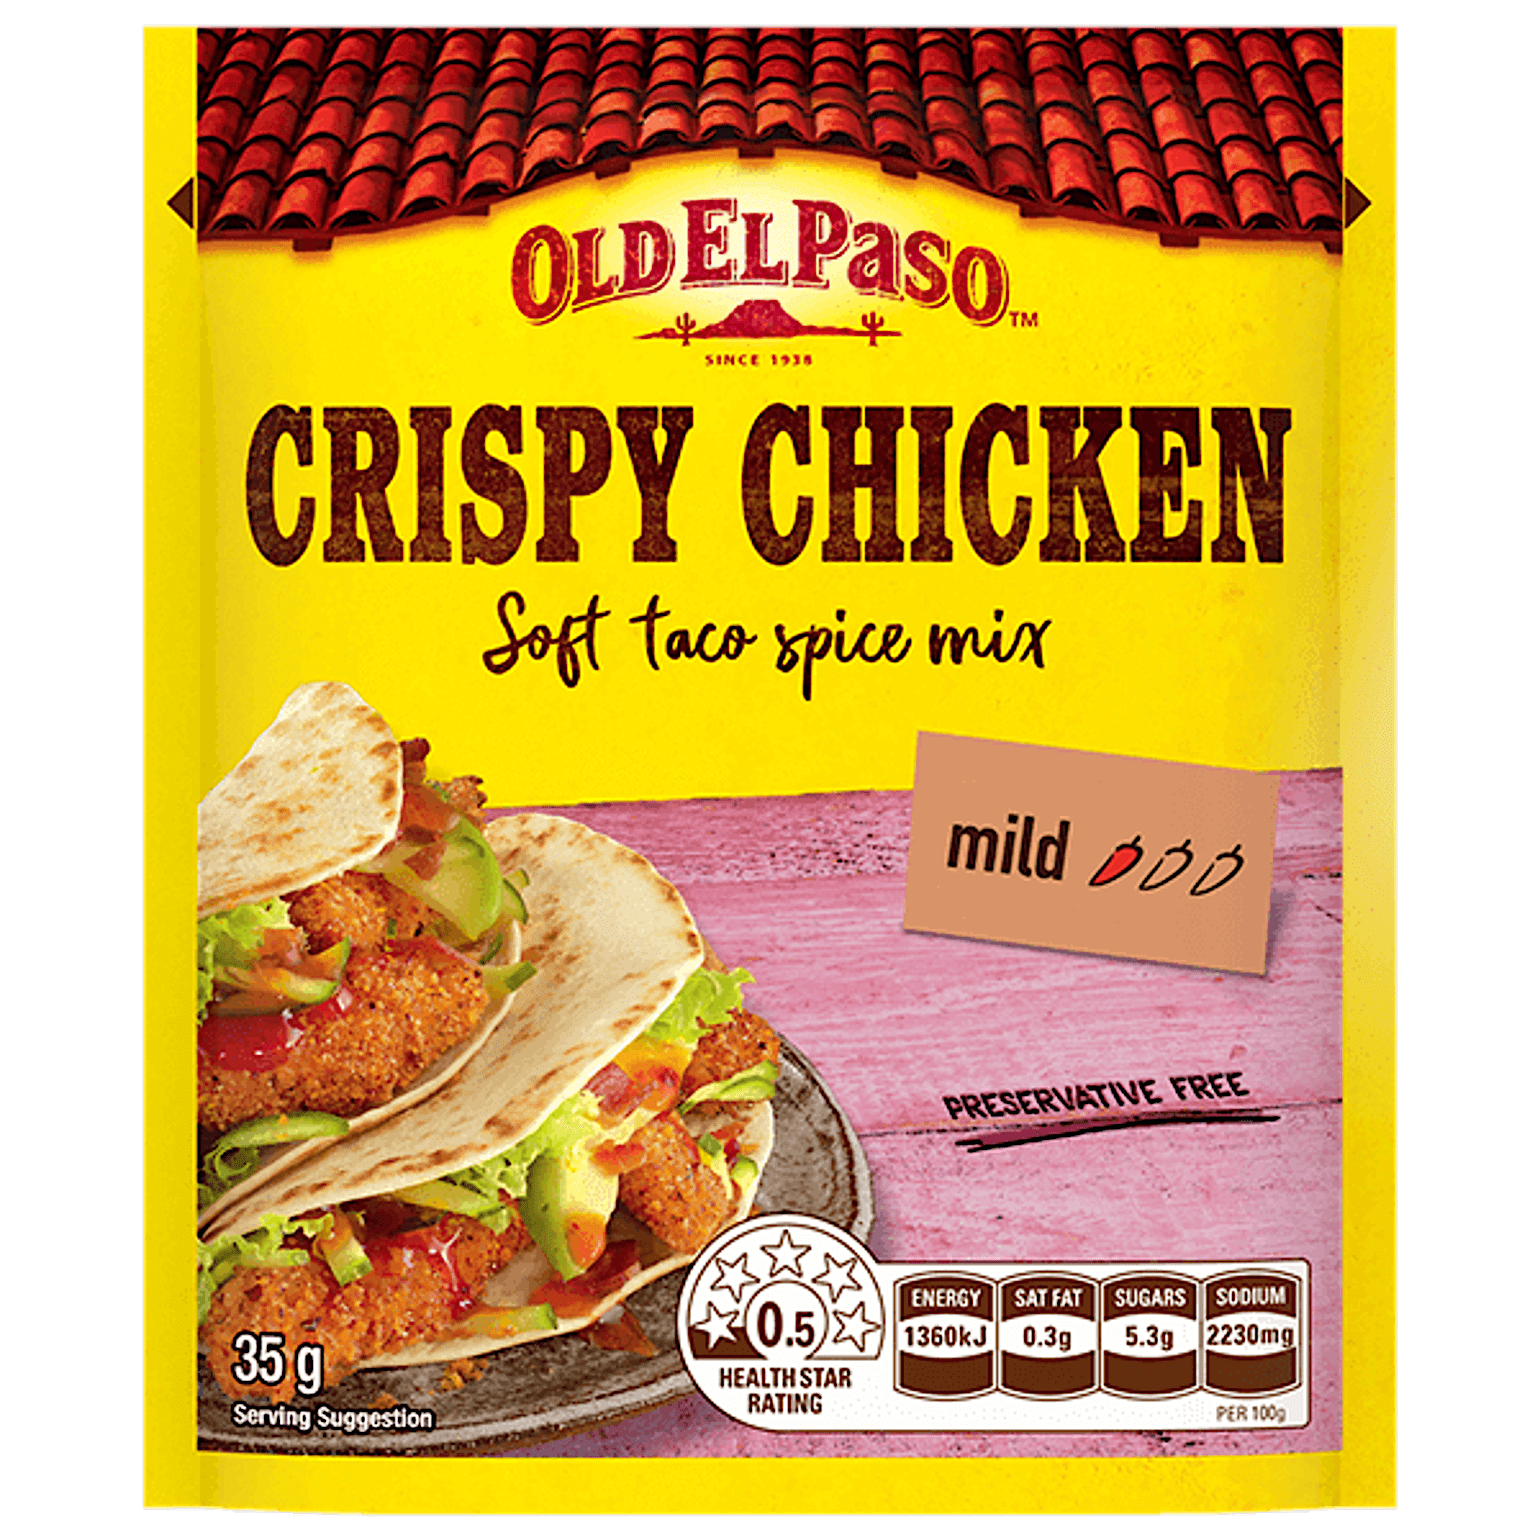 a pack of Old El Paso's crispy chicken mild soft taco spice mix (35g)